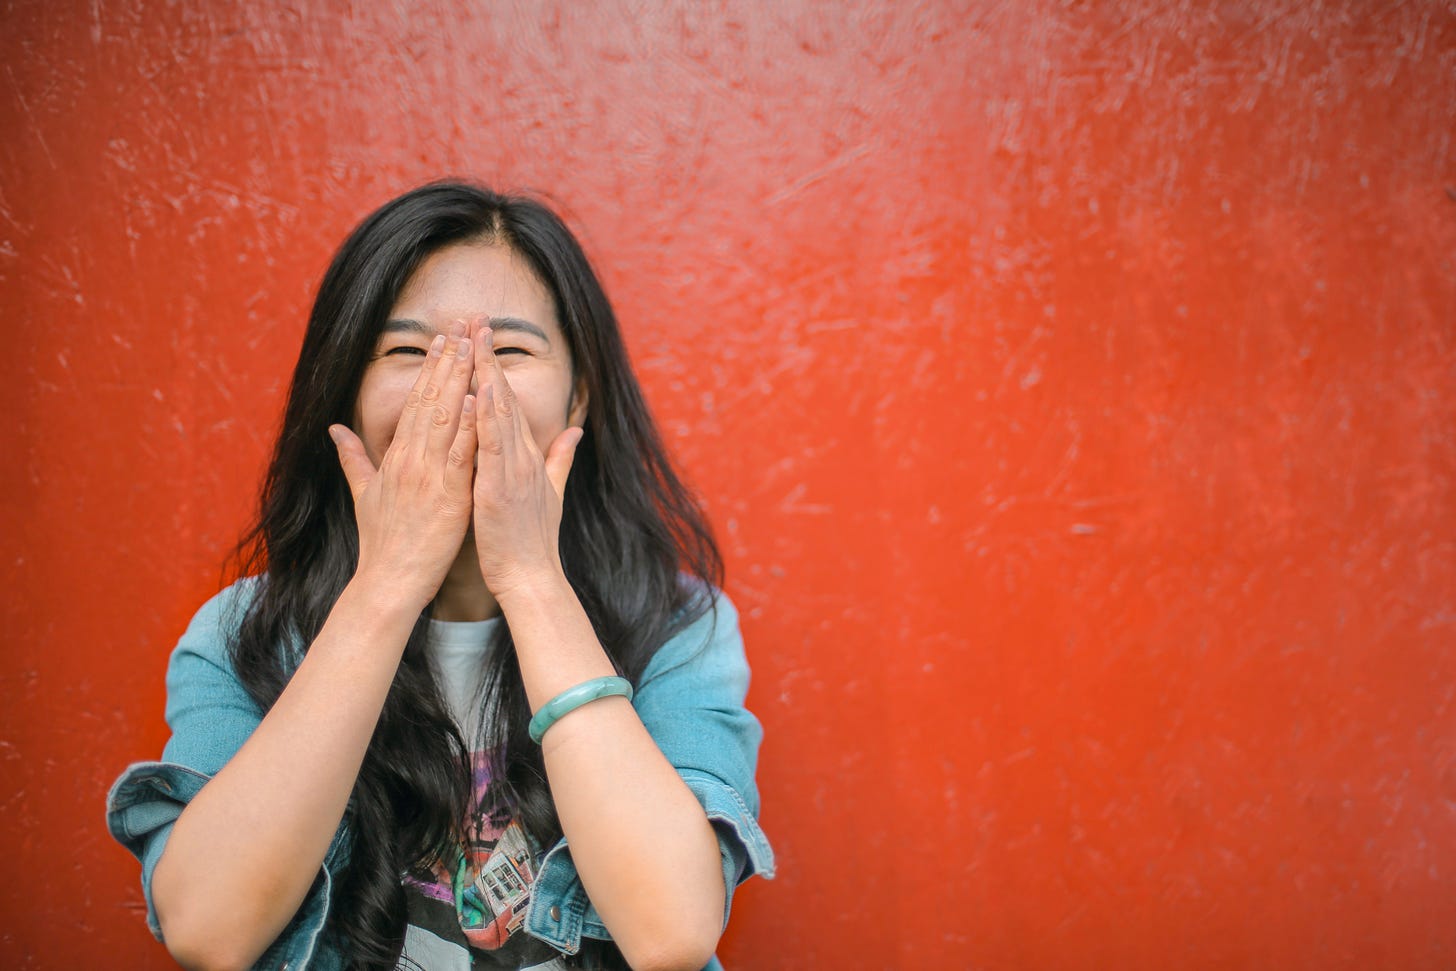 A woman in front of a red wall covering her face with her hands while laughing.